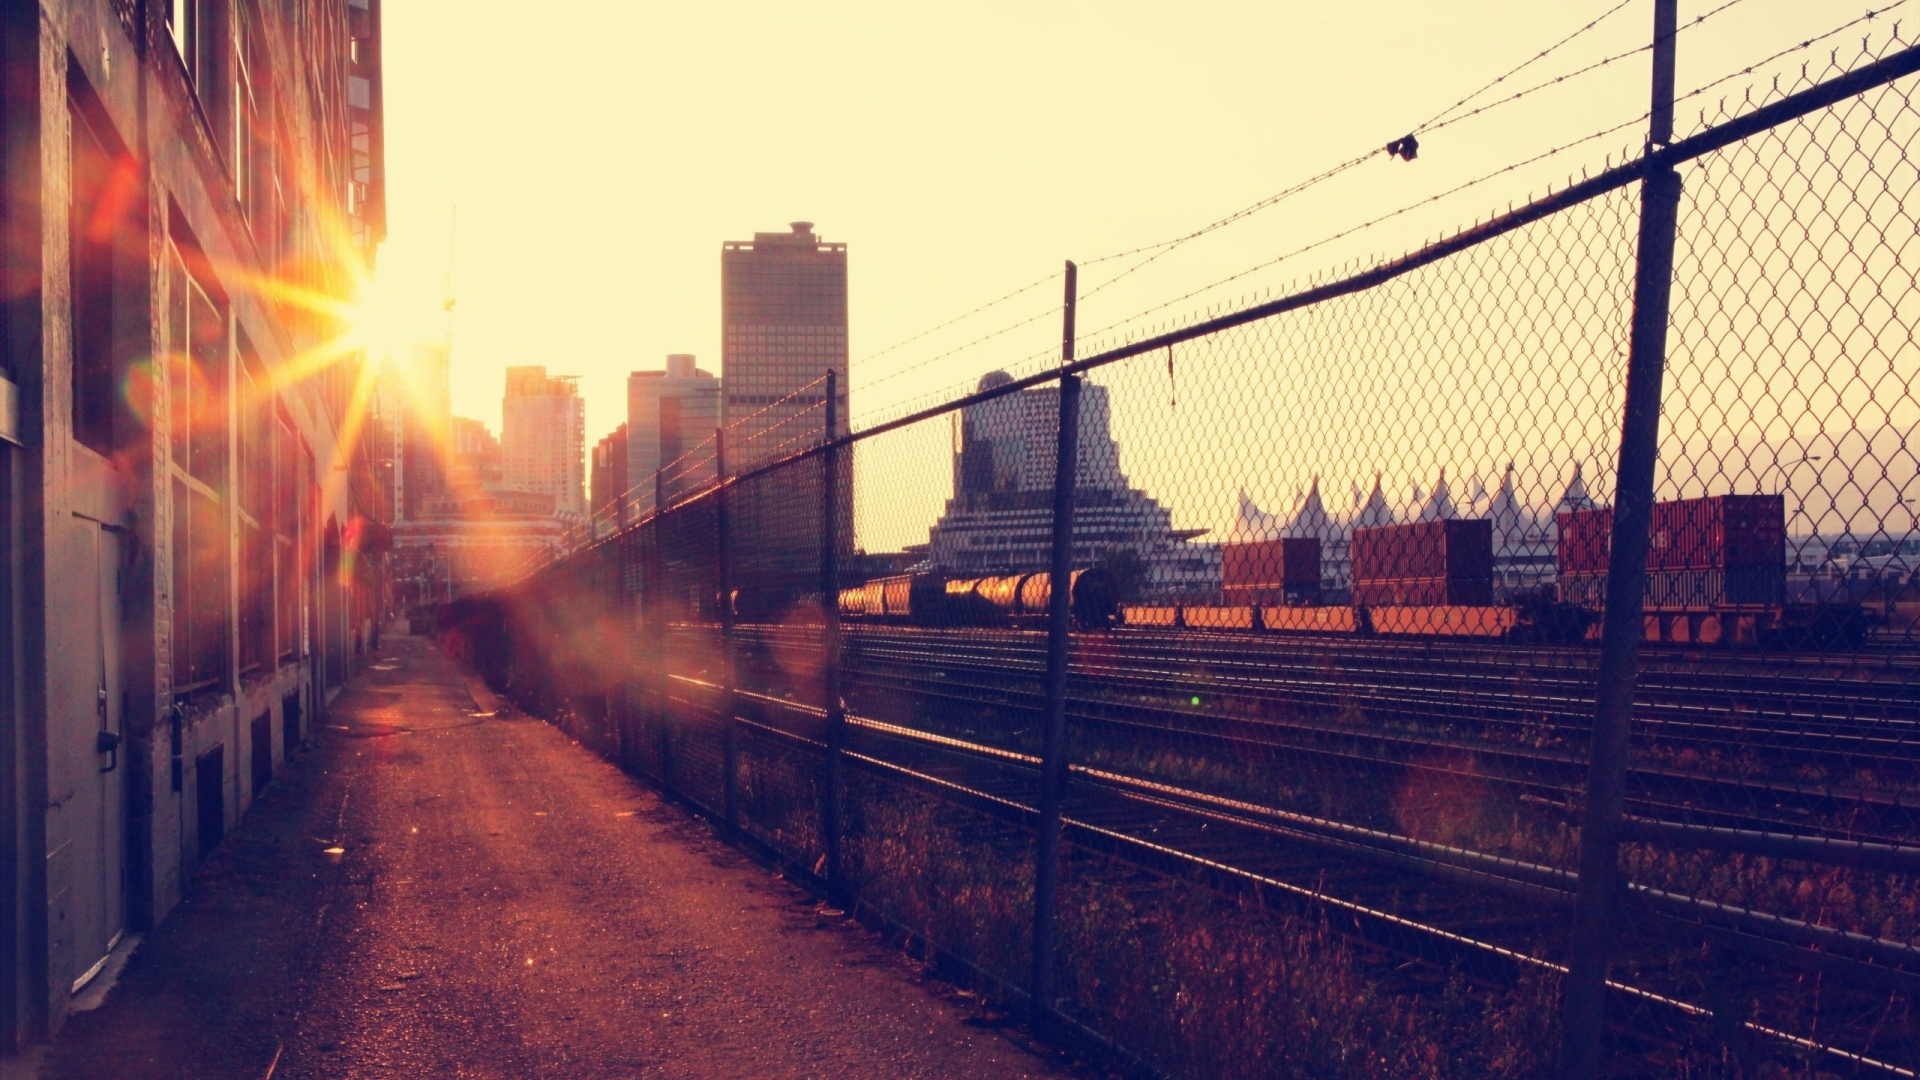 Download Wallpaper 1920x1080 sun, morning, city, buildings, houses ...